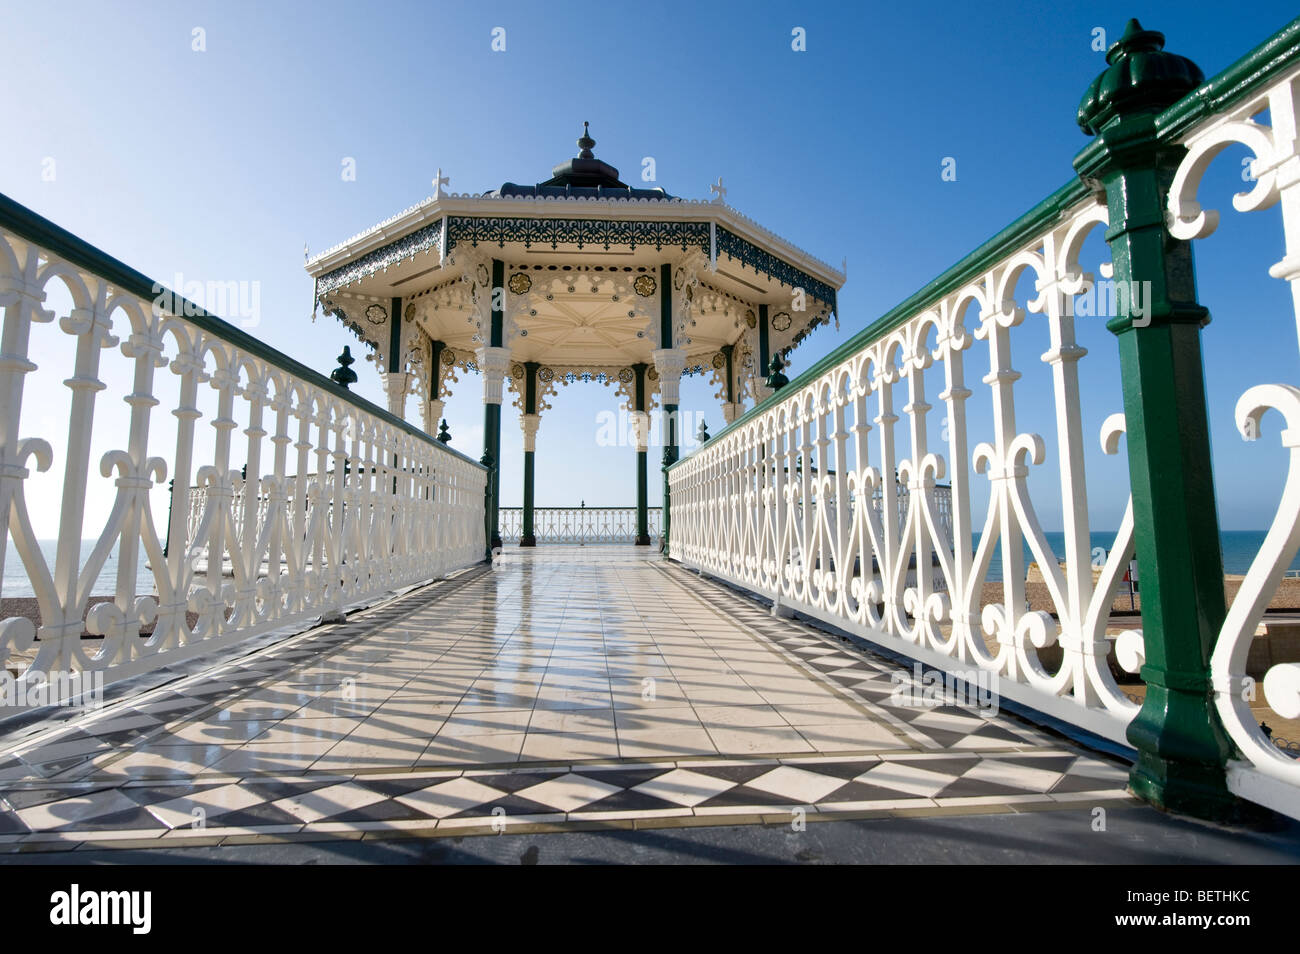 The newly restored bandstand on Hove seafront in East Sussex, UK. Picture Jim Holden. Stock Photo